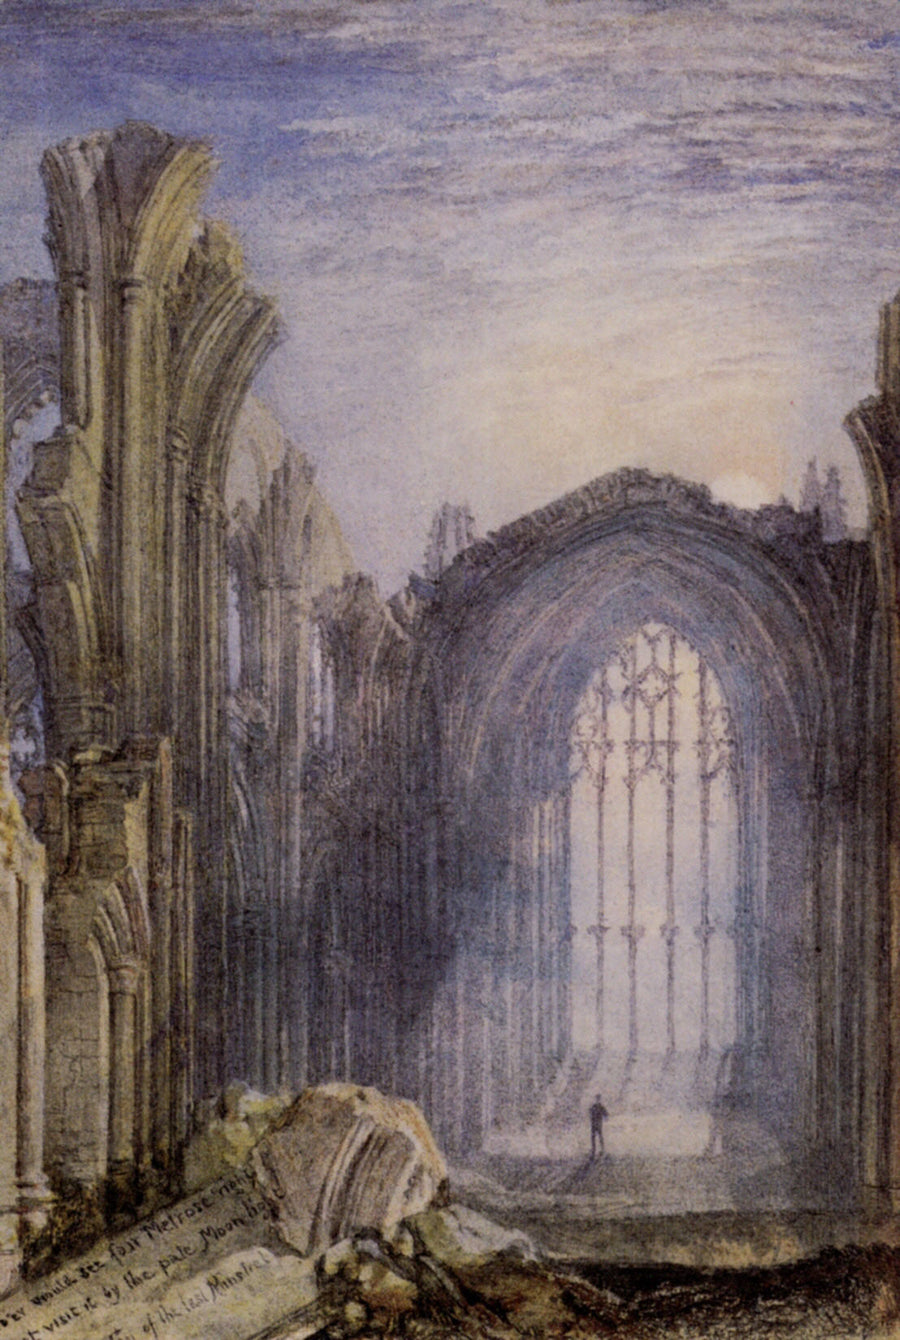 Melrose Abbey by J. M. W. Turner. Seascape painting, Turner artworks, Turner canvas art, J. M. W. Turner oil painting, Turner reproduction for sale. Landscape paintings, Turner art decor, Turner oil painting on canvas, Blue Surf Art